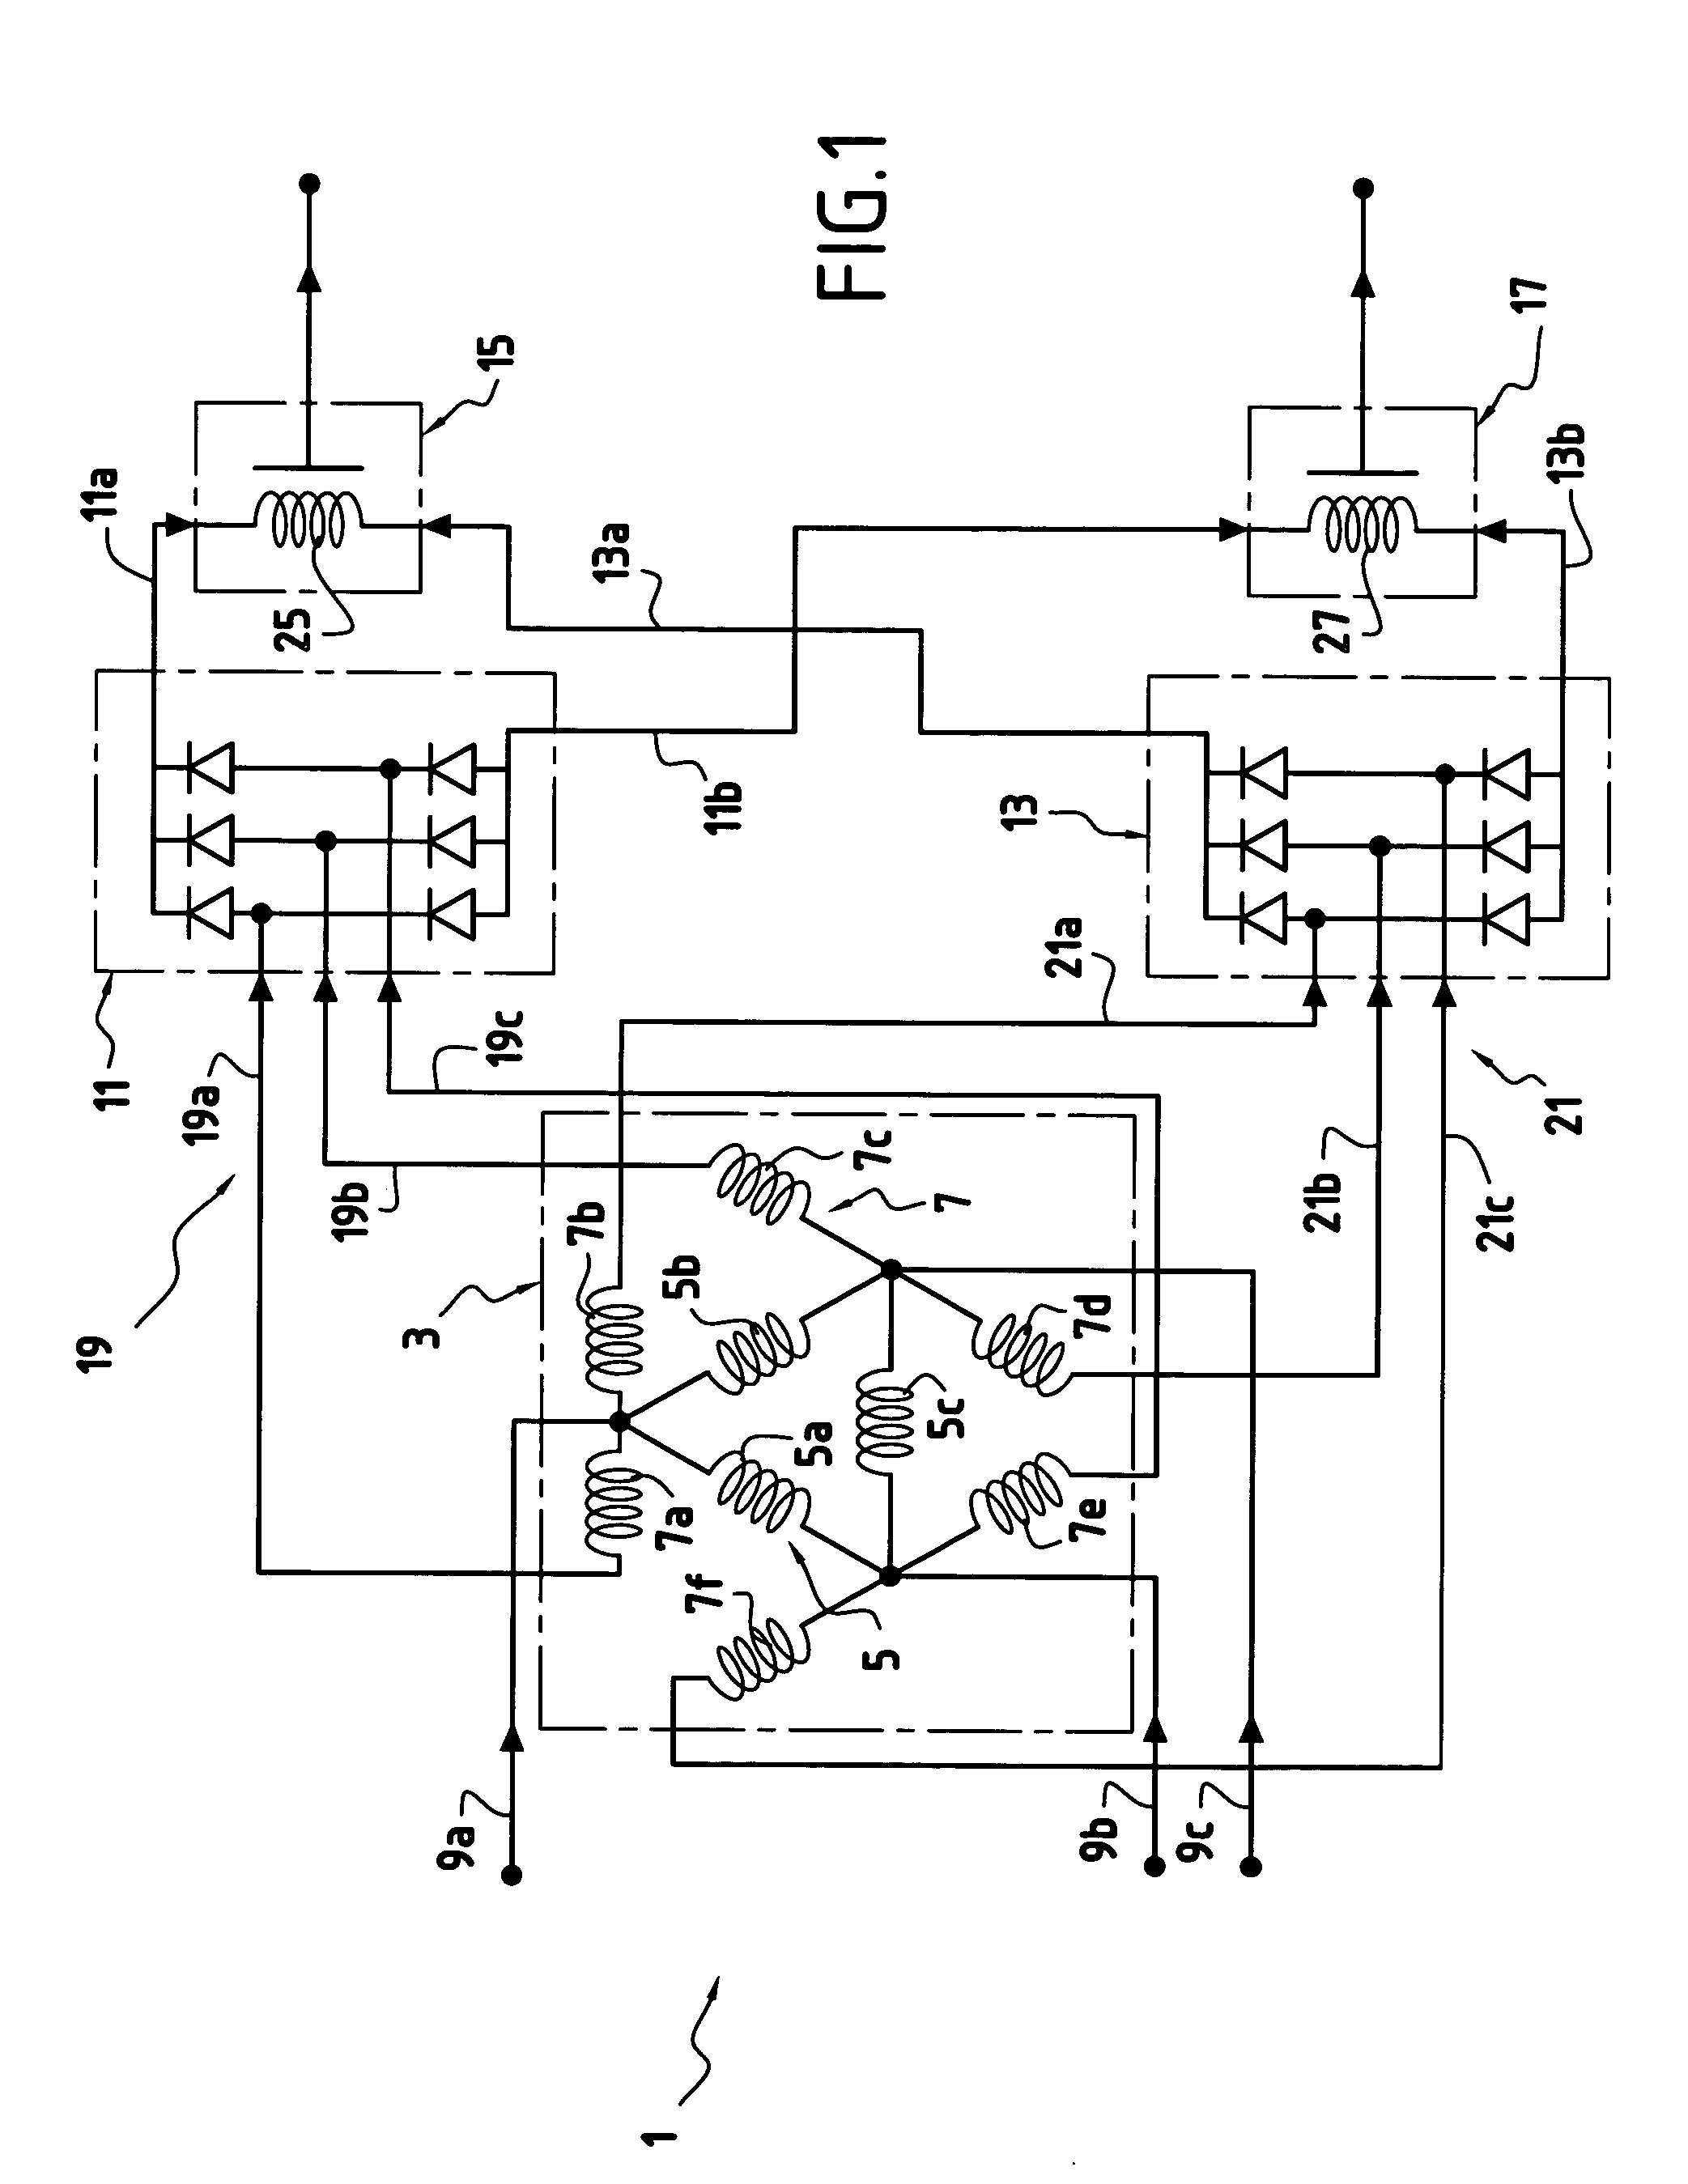 12-Pulse converter including a filter choke incorporated in the rectifier